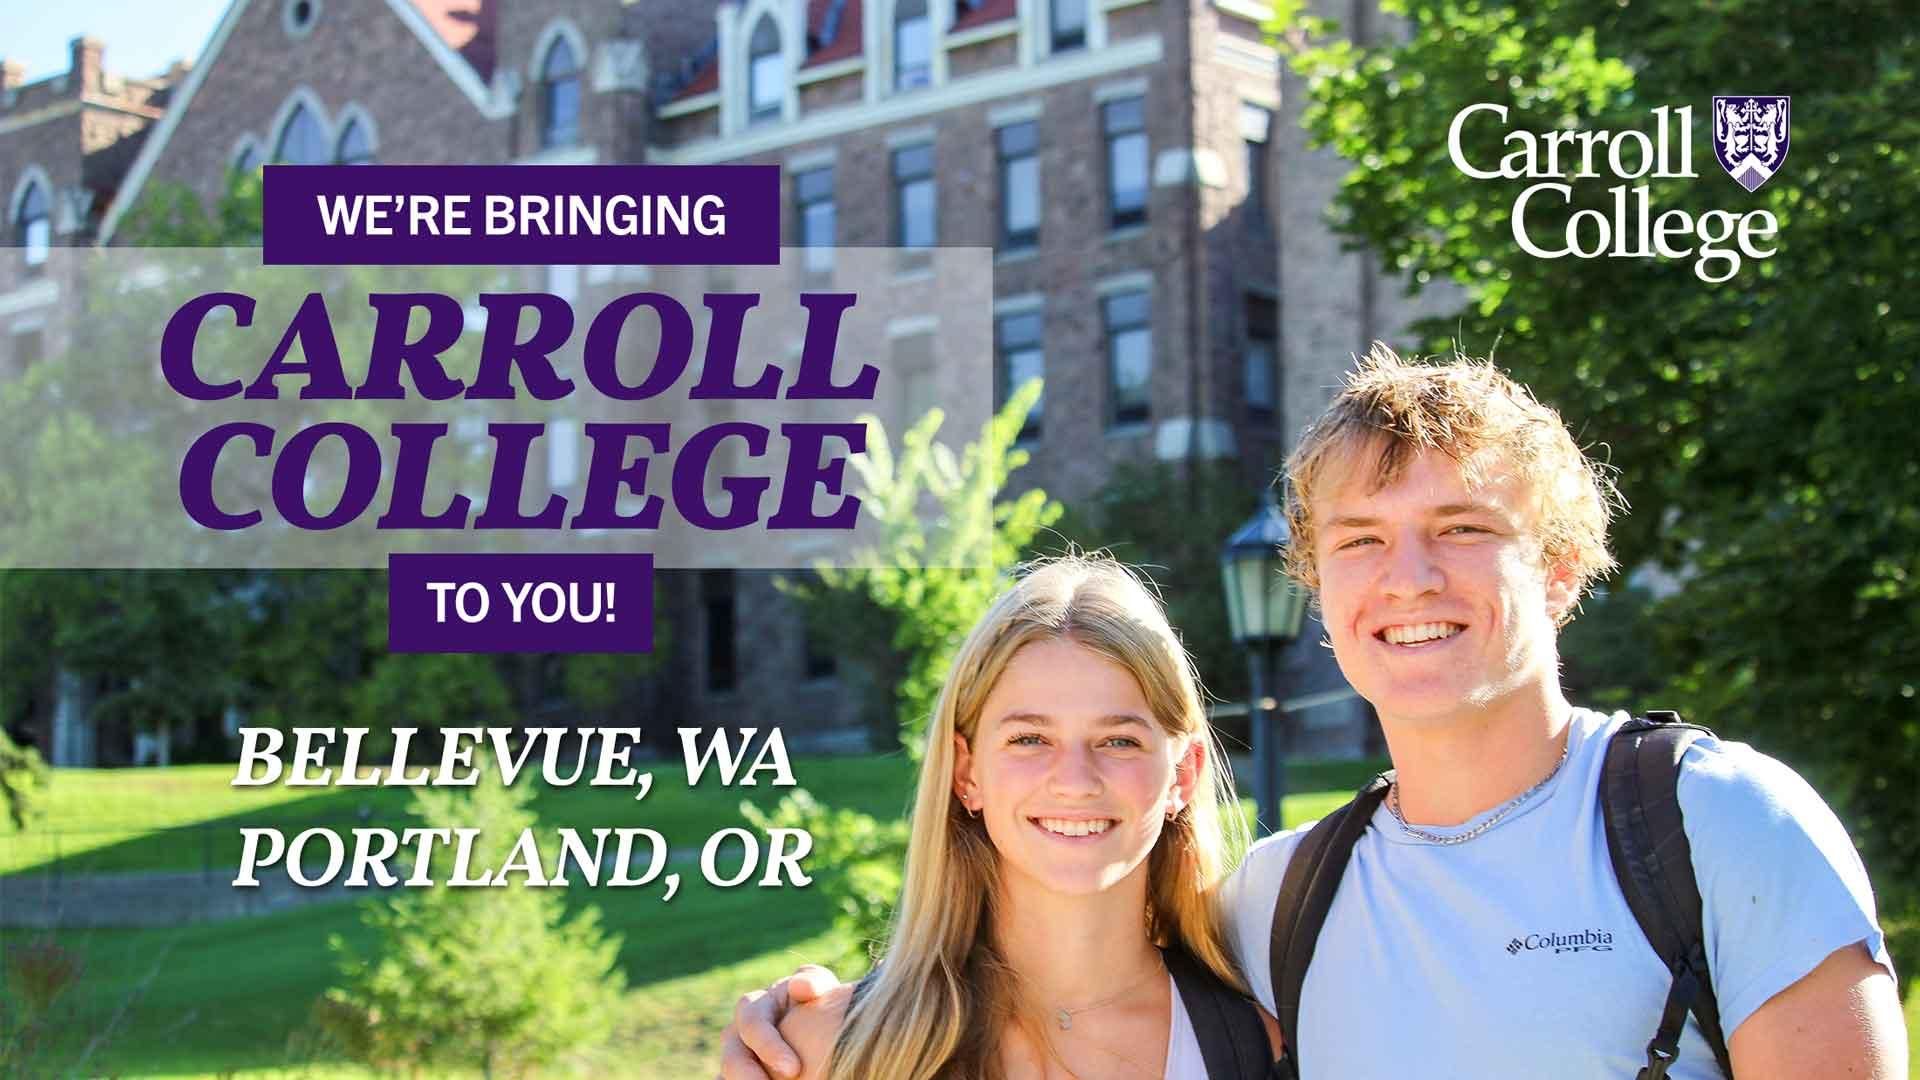 Carroll College is coming to Bellevue, WA and Portland, OR